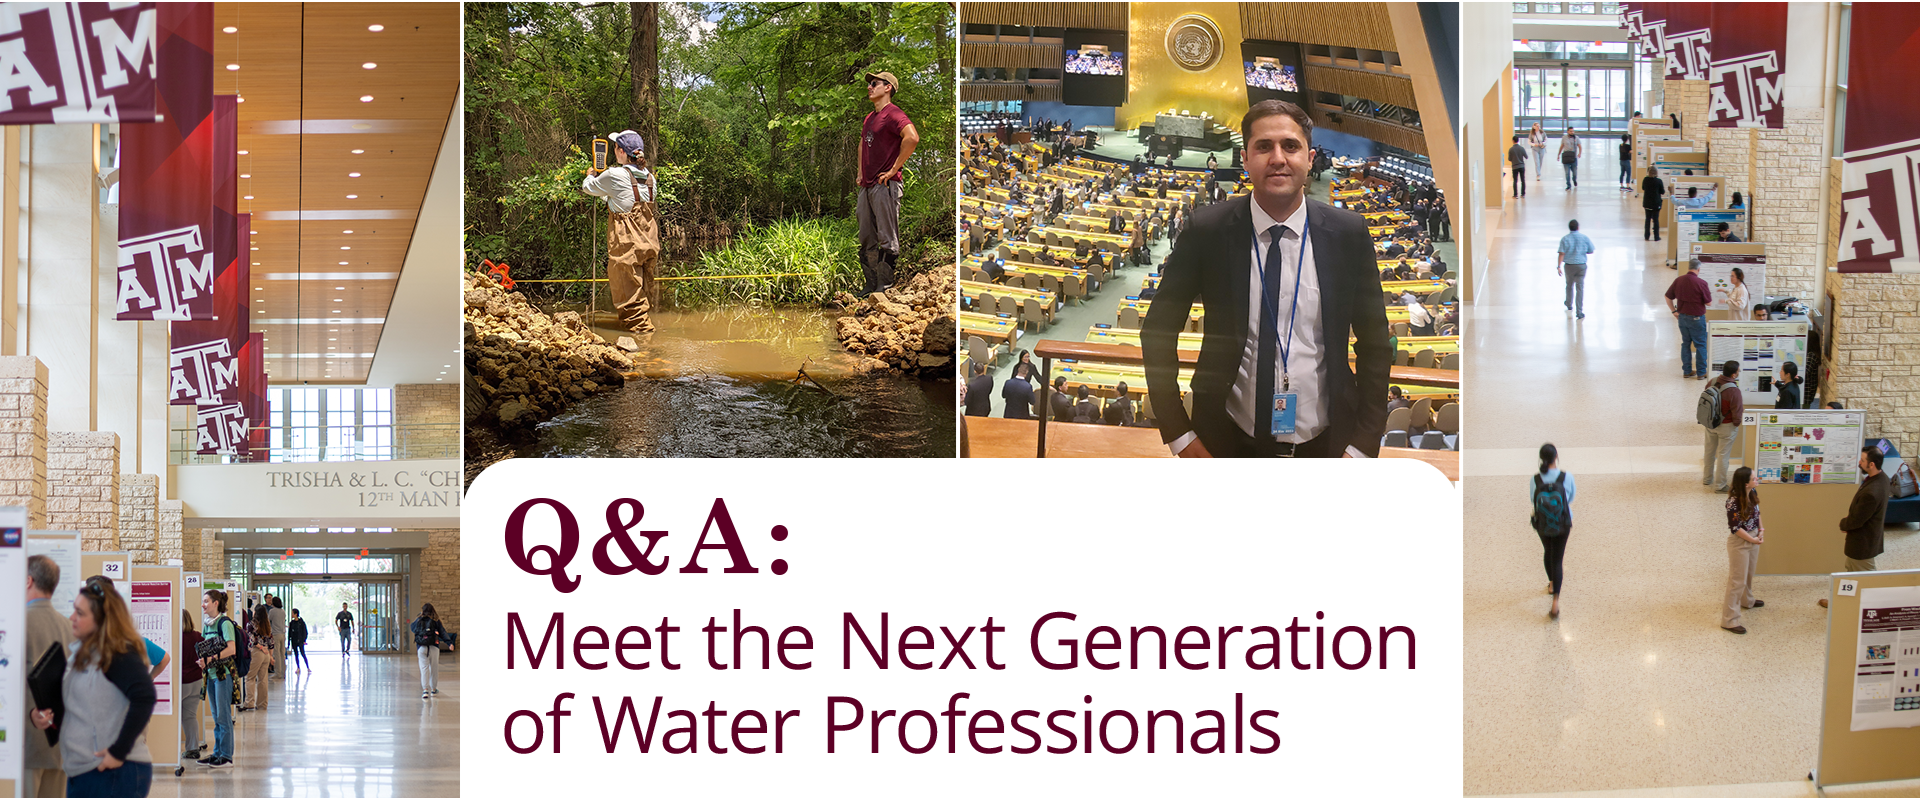 Q&A: Meet the Next Generation of Water Professionals